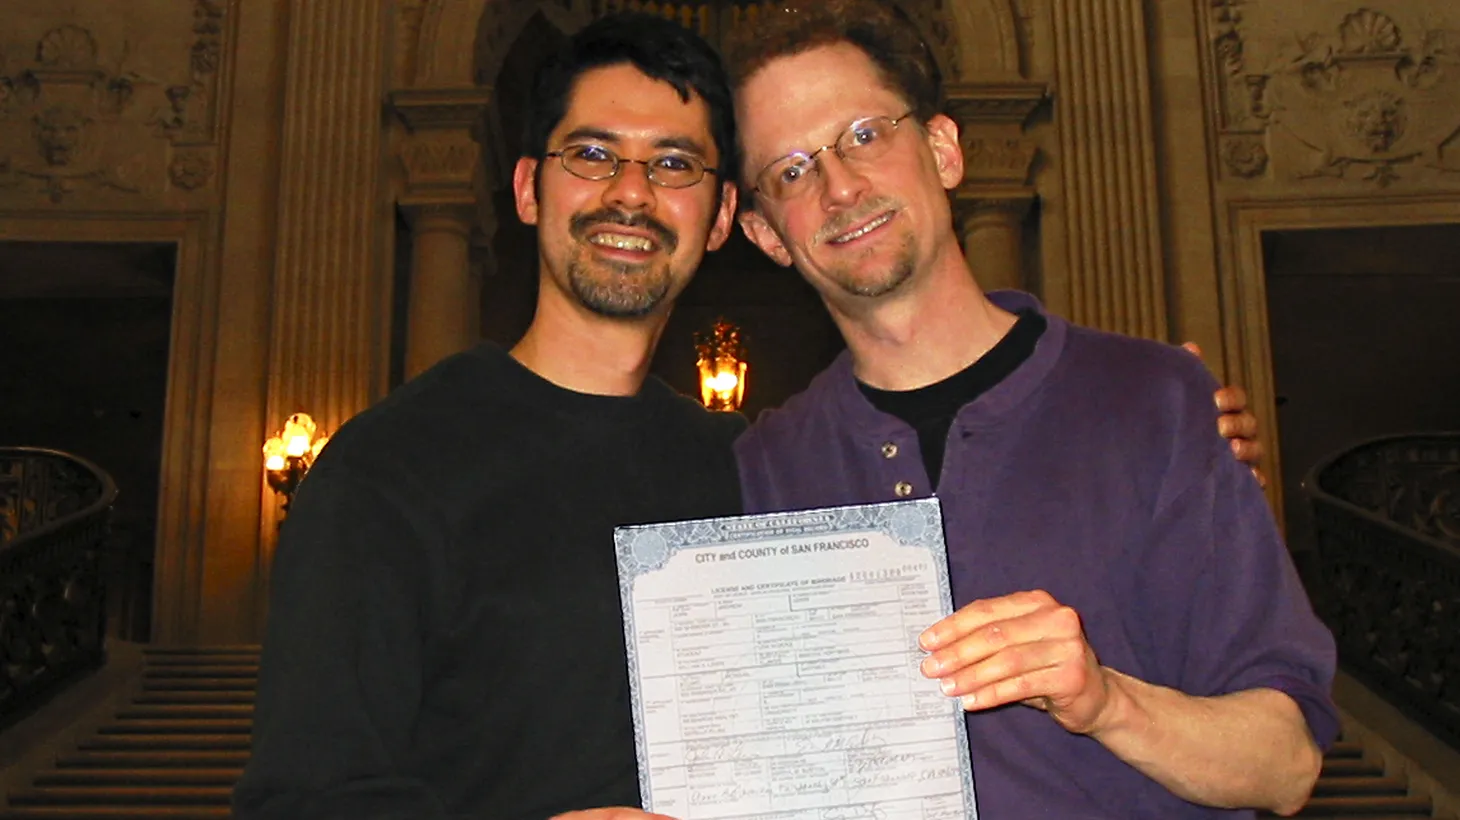 Stuart Gaffney (left) and John Lewis (right) hold up their marriage certificate on Feb. 12, 2004.